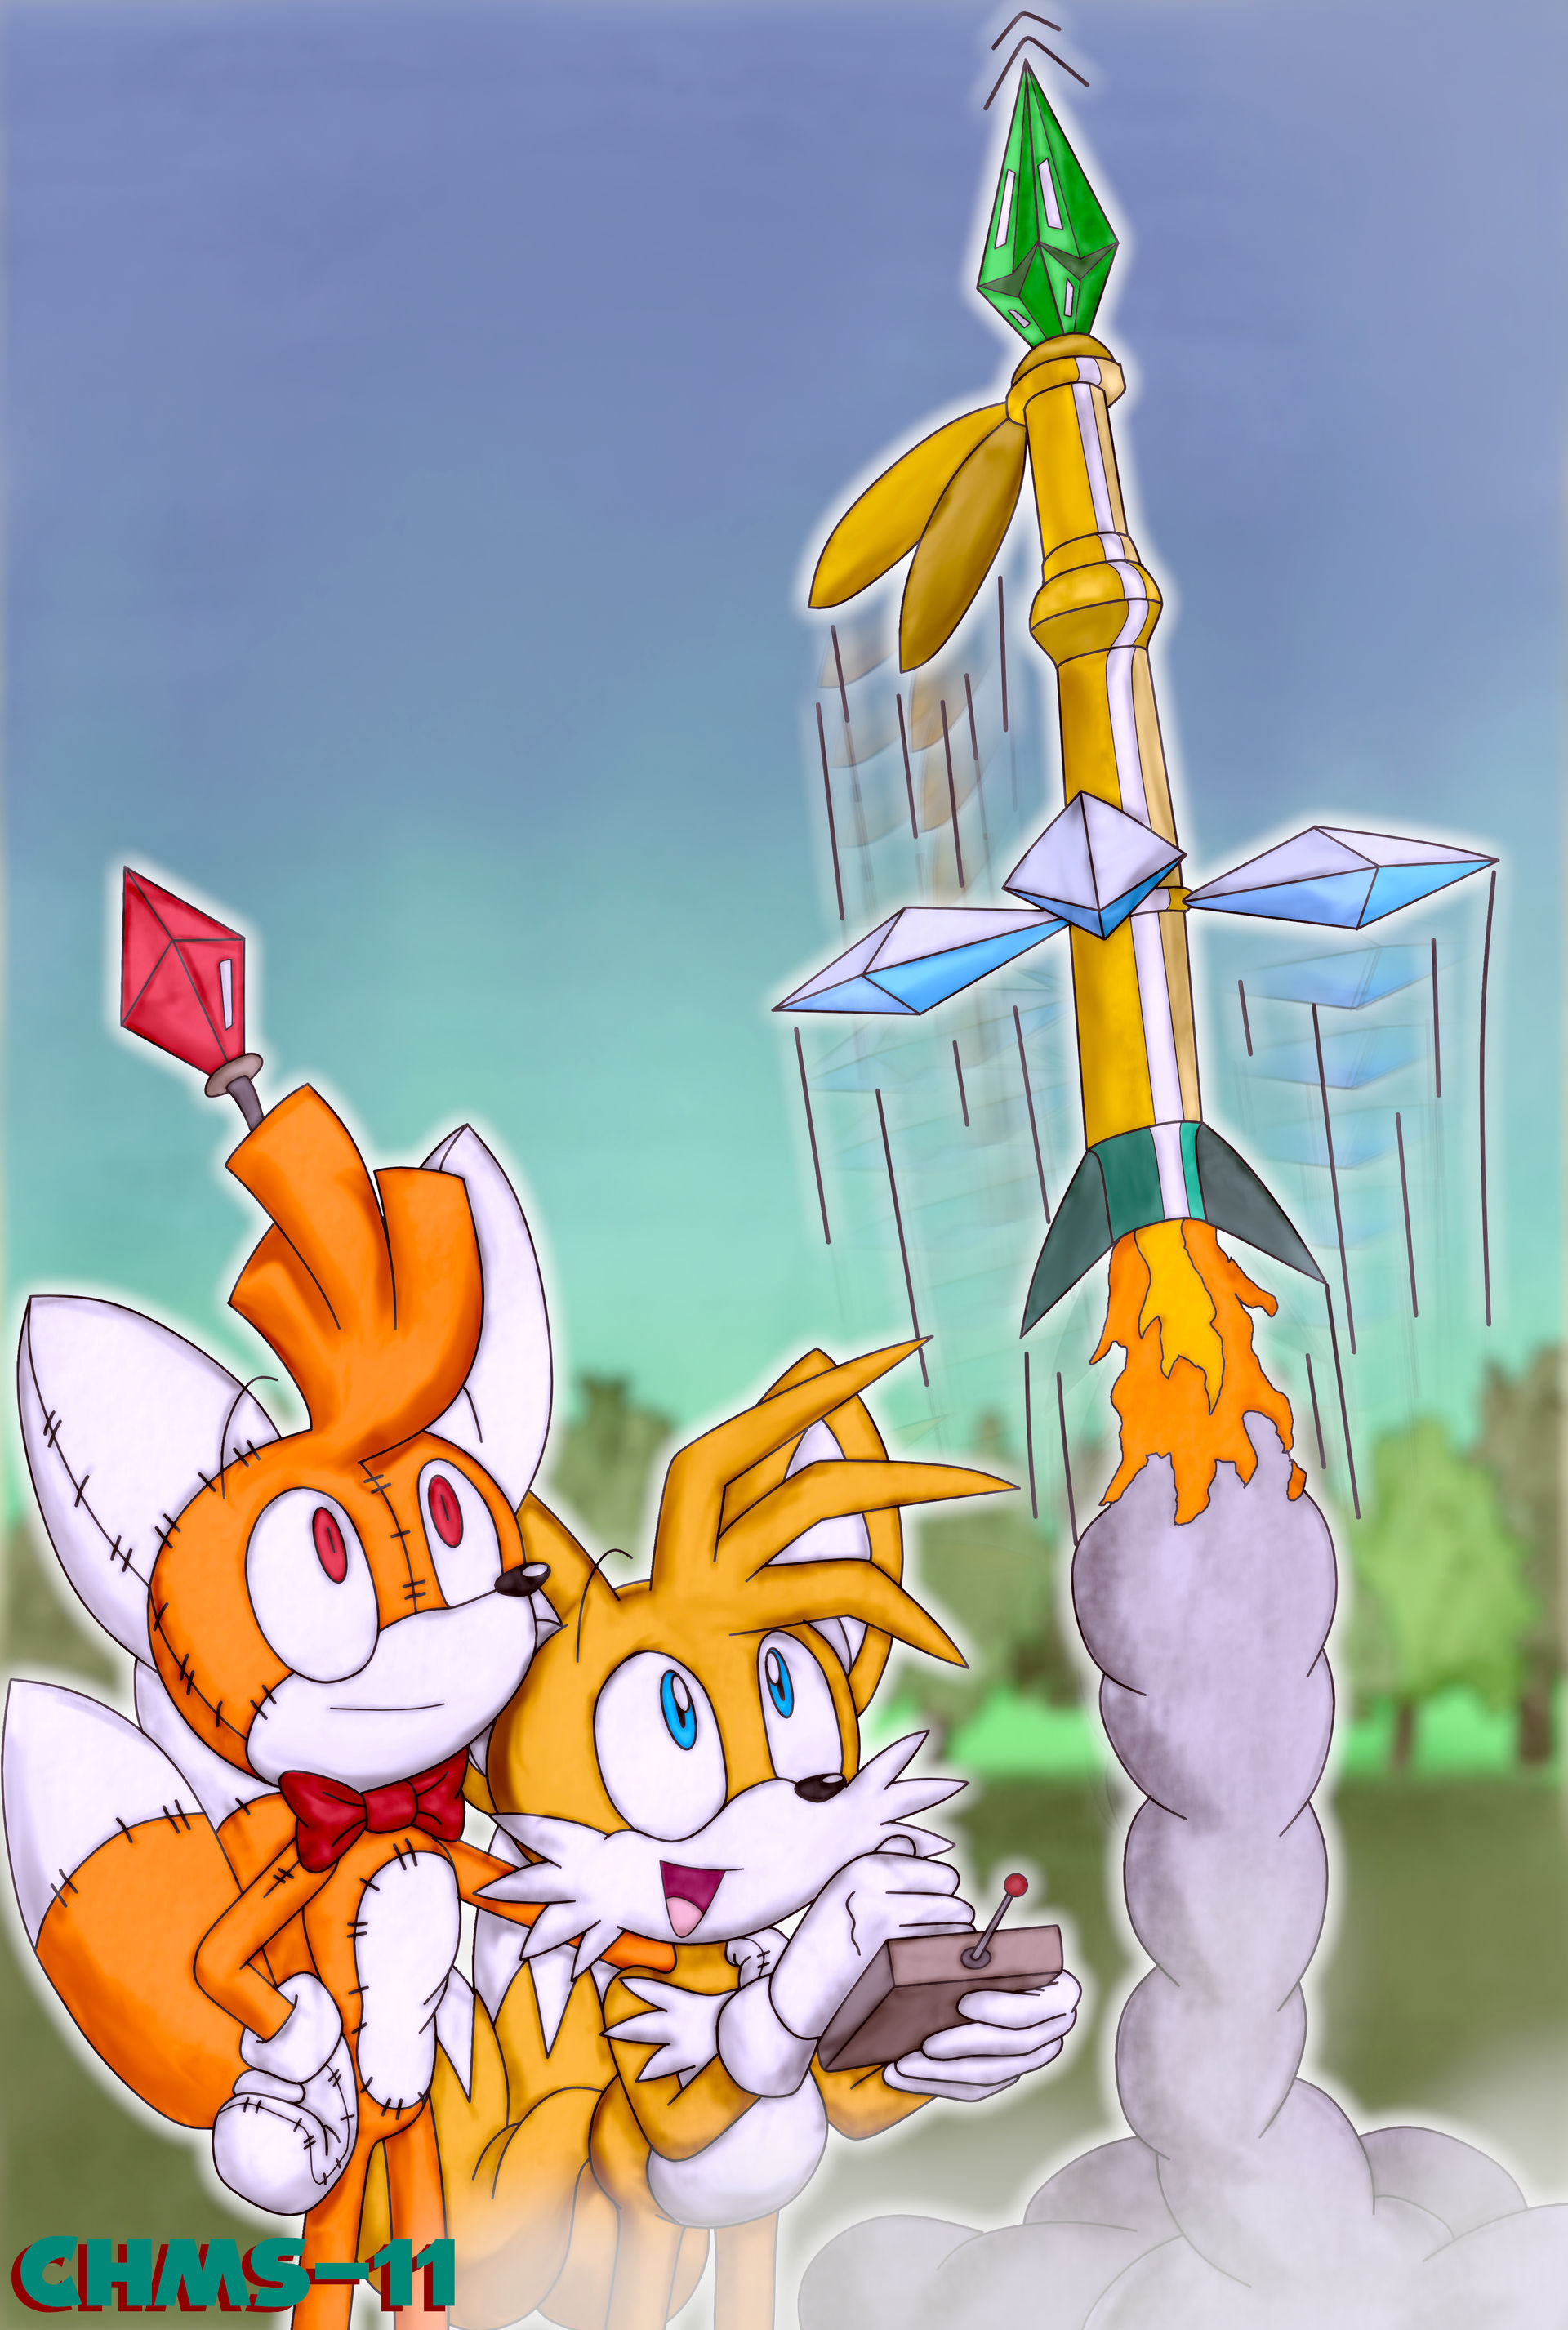 Tails Doll, an art print by Zephyr - INPRNT